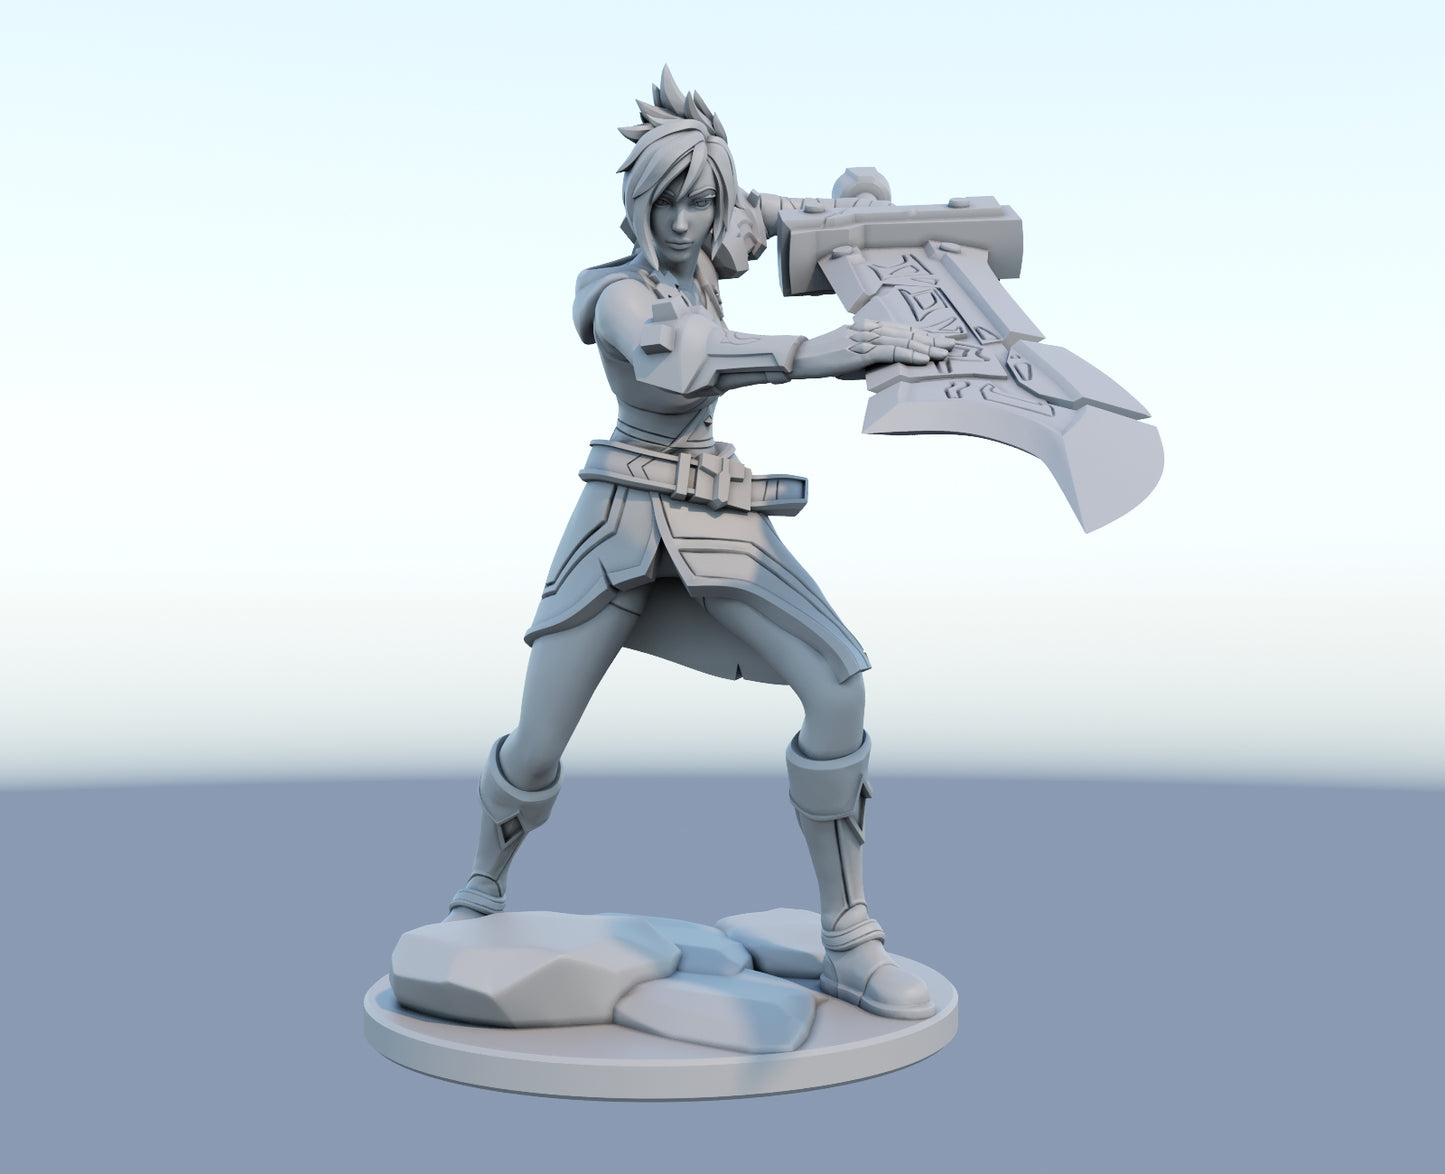 Riven 3D-printed League of Legends champion figure. Decorate your gaming setup or home with your favorite League of Legends champion! Choose between the unpainted version, perfect for you to paint yourself, or the hand-painted version by a professional painter. Order your figure today!